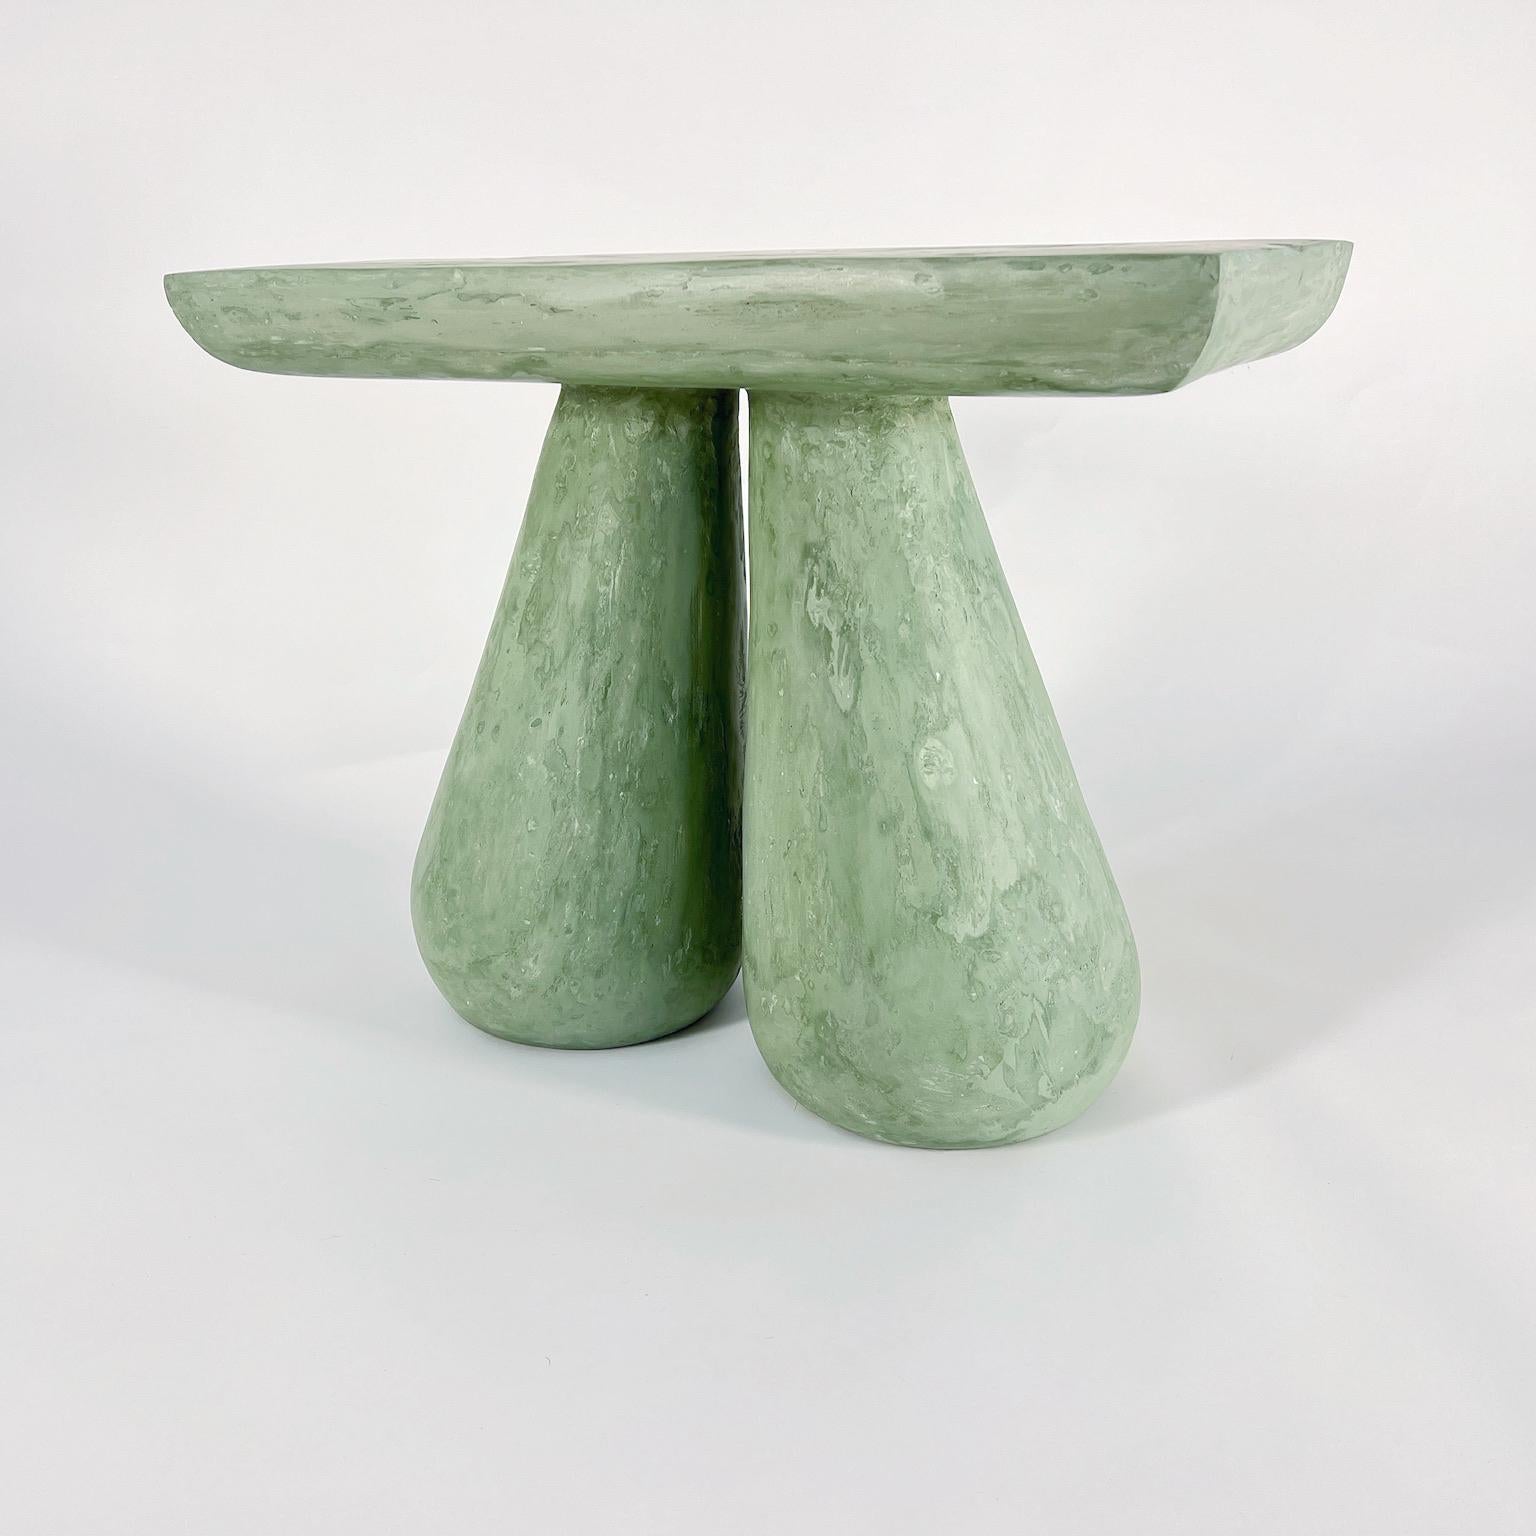 Erika Mini Table by Dean and Dahl

L 28